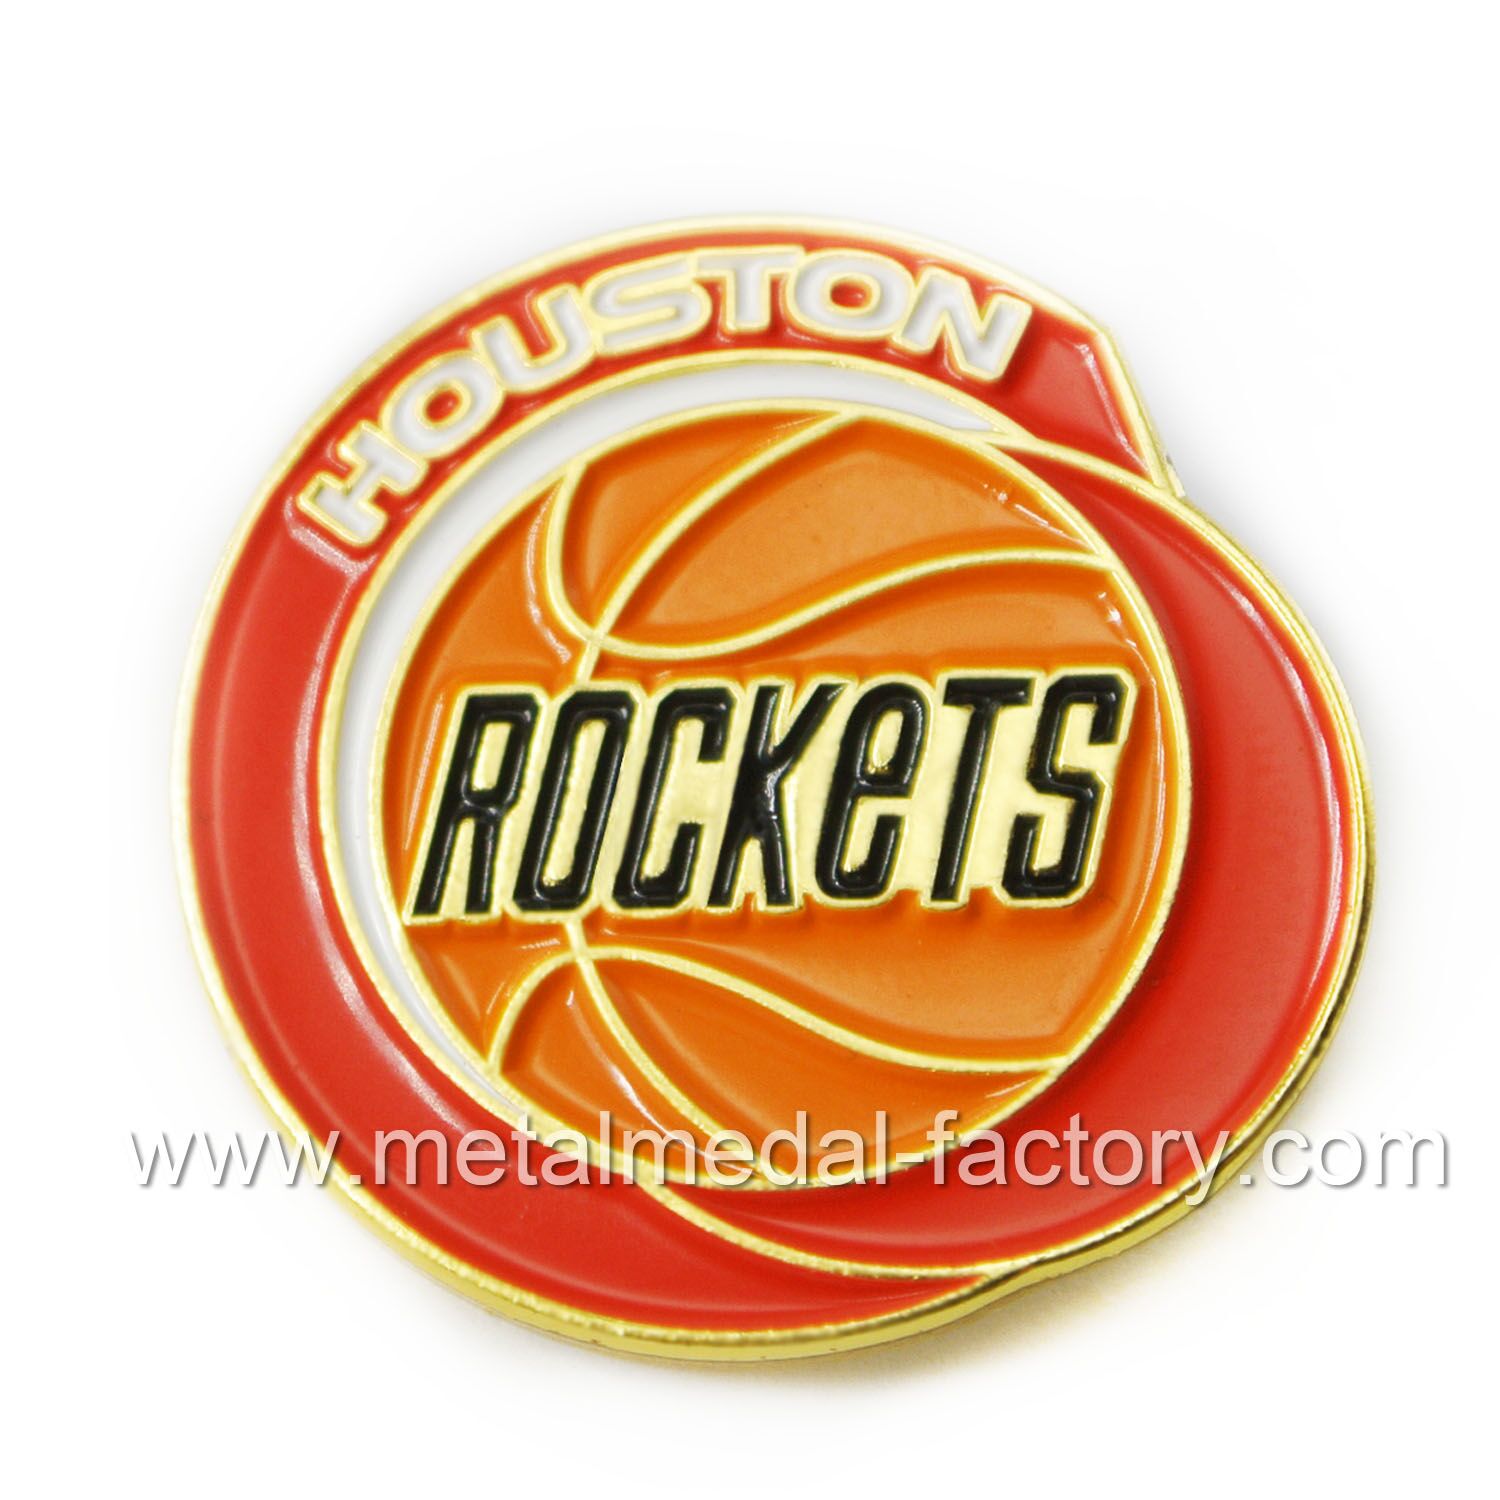 Houston Rockets: we are very satisfied with their efficient service and high quality pins